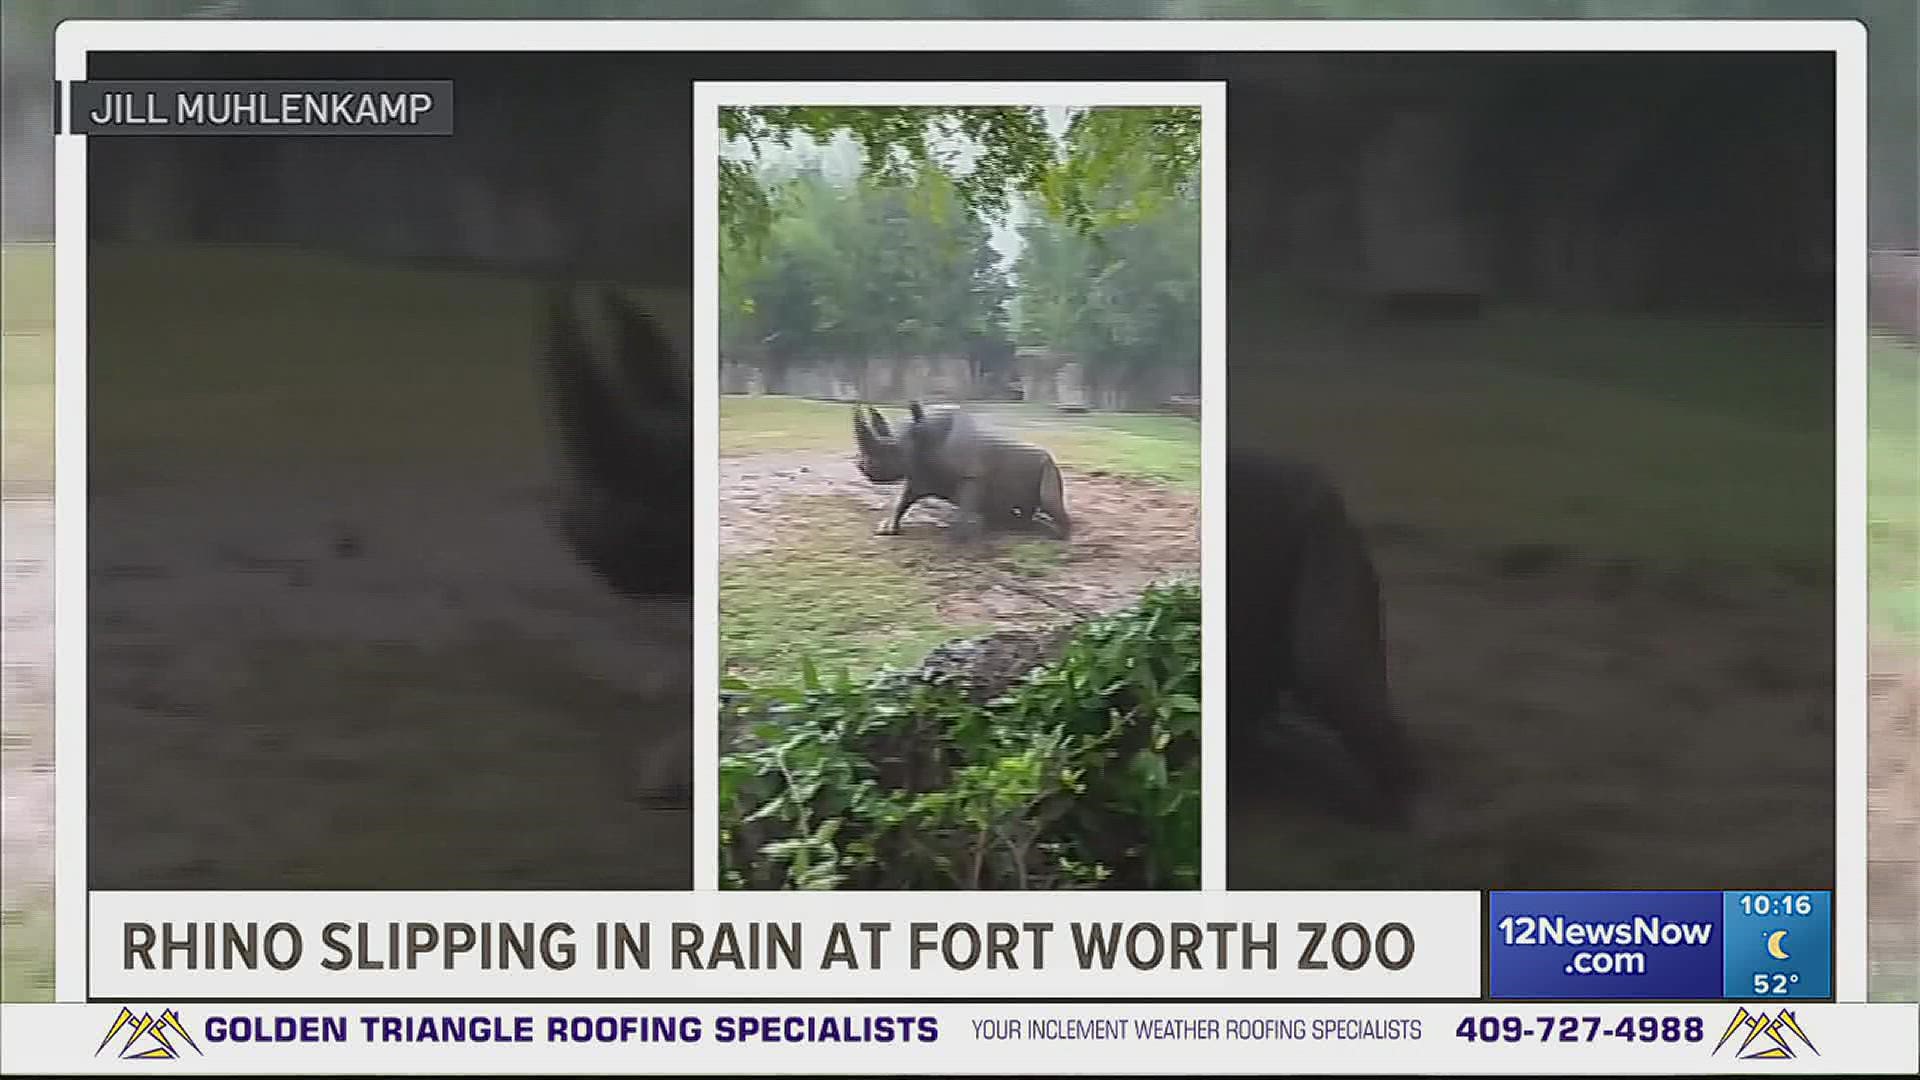 Students on a field trip to a zoo in Fort Worth, Texas, enjoyed watching a rhinoceros run around in the rain and slide in the mud.